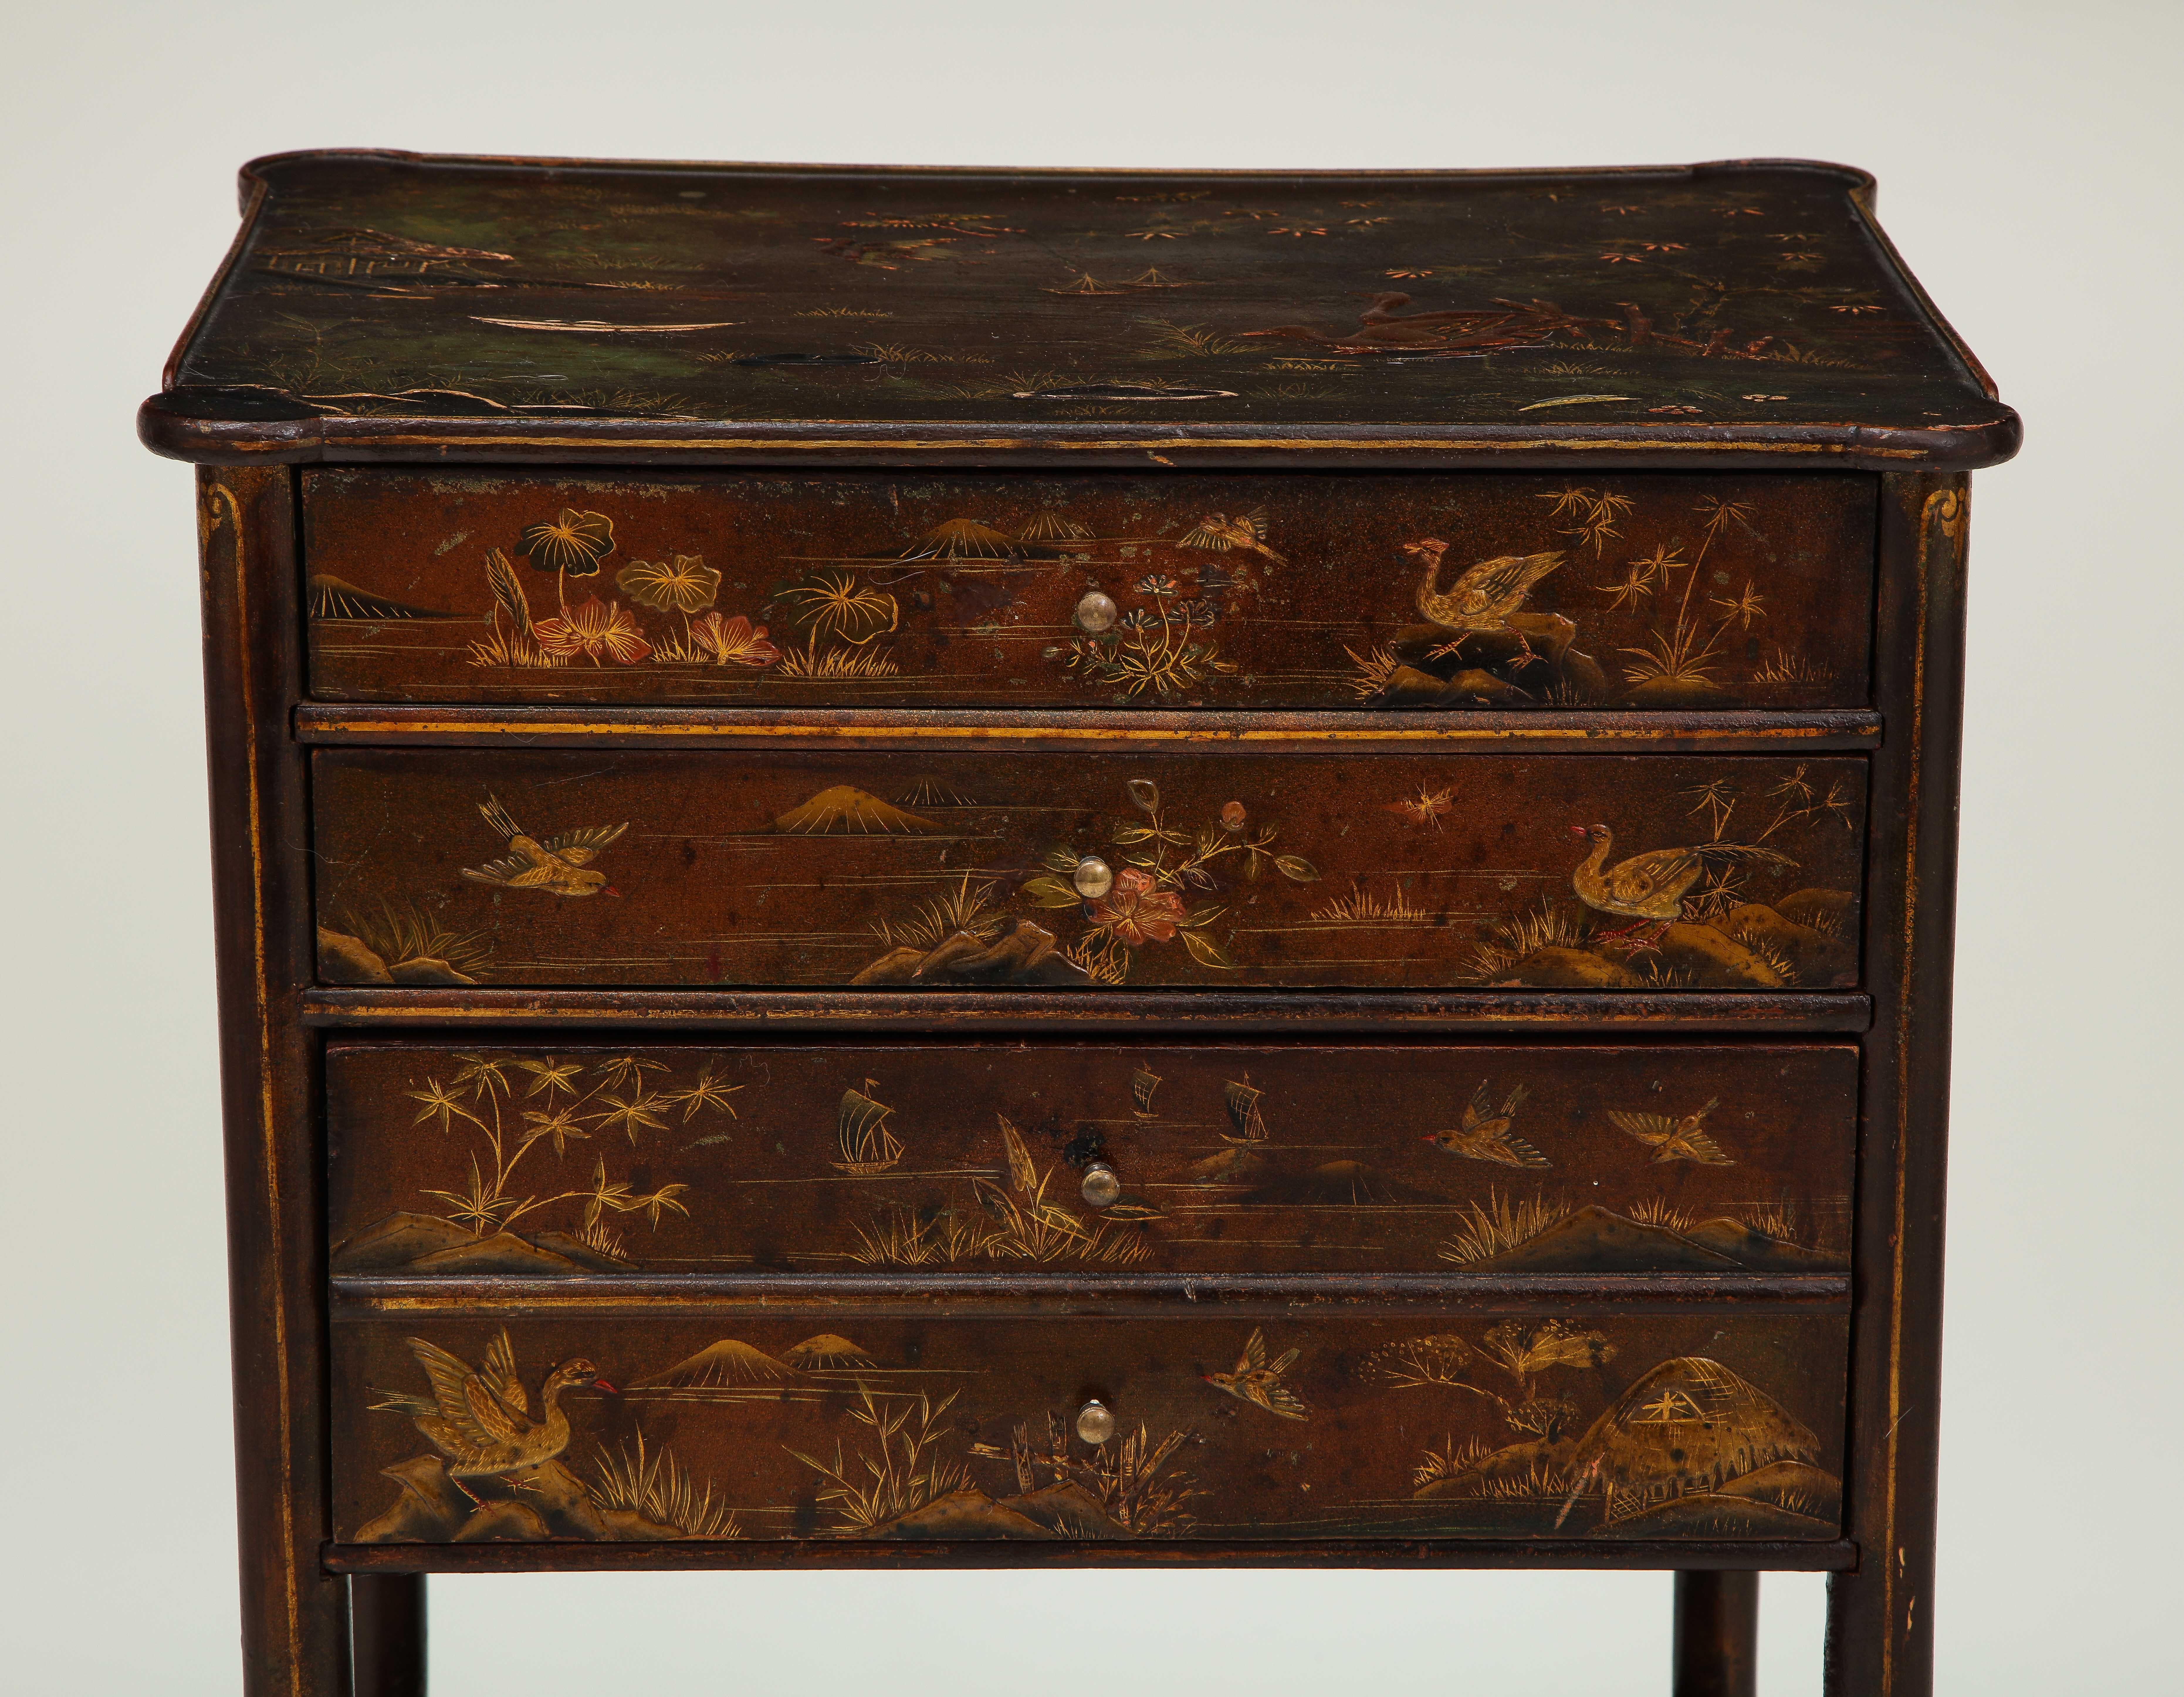 With four drawers above a medial shelf, curved legs, decorated on all sides with exotic birds, old French printed paper label ‘[Maison de L'Escalier de Cristal]/Pannier-Lahoche & Cie, 1, Rue Auber & Rue Scribe, 6 [En face e Grand Opera]’

Escalier